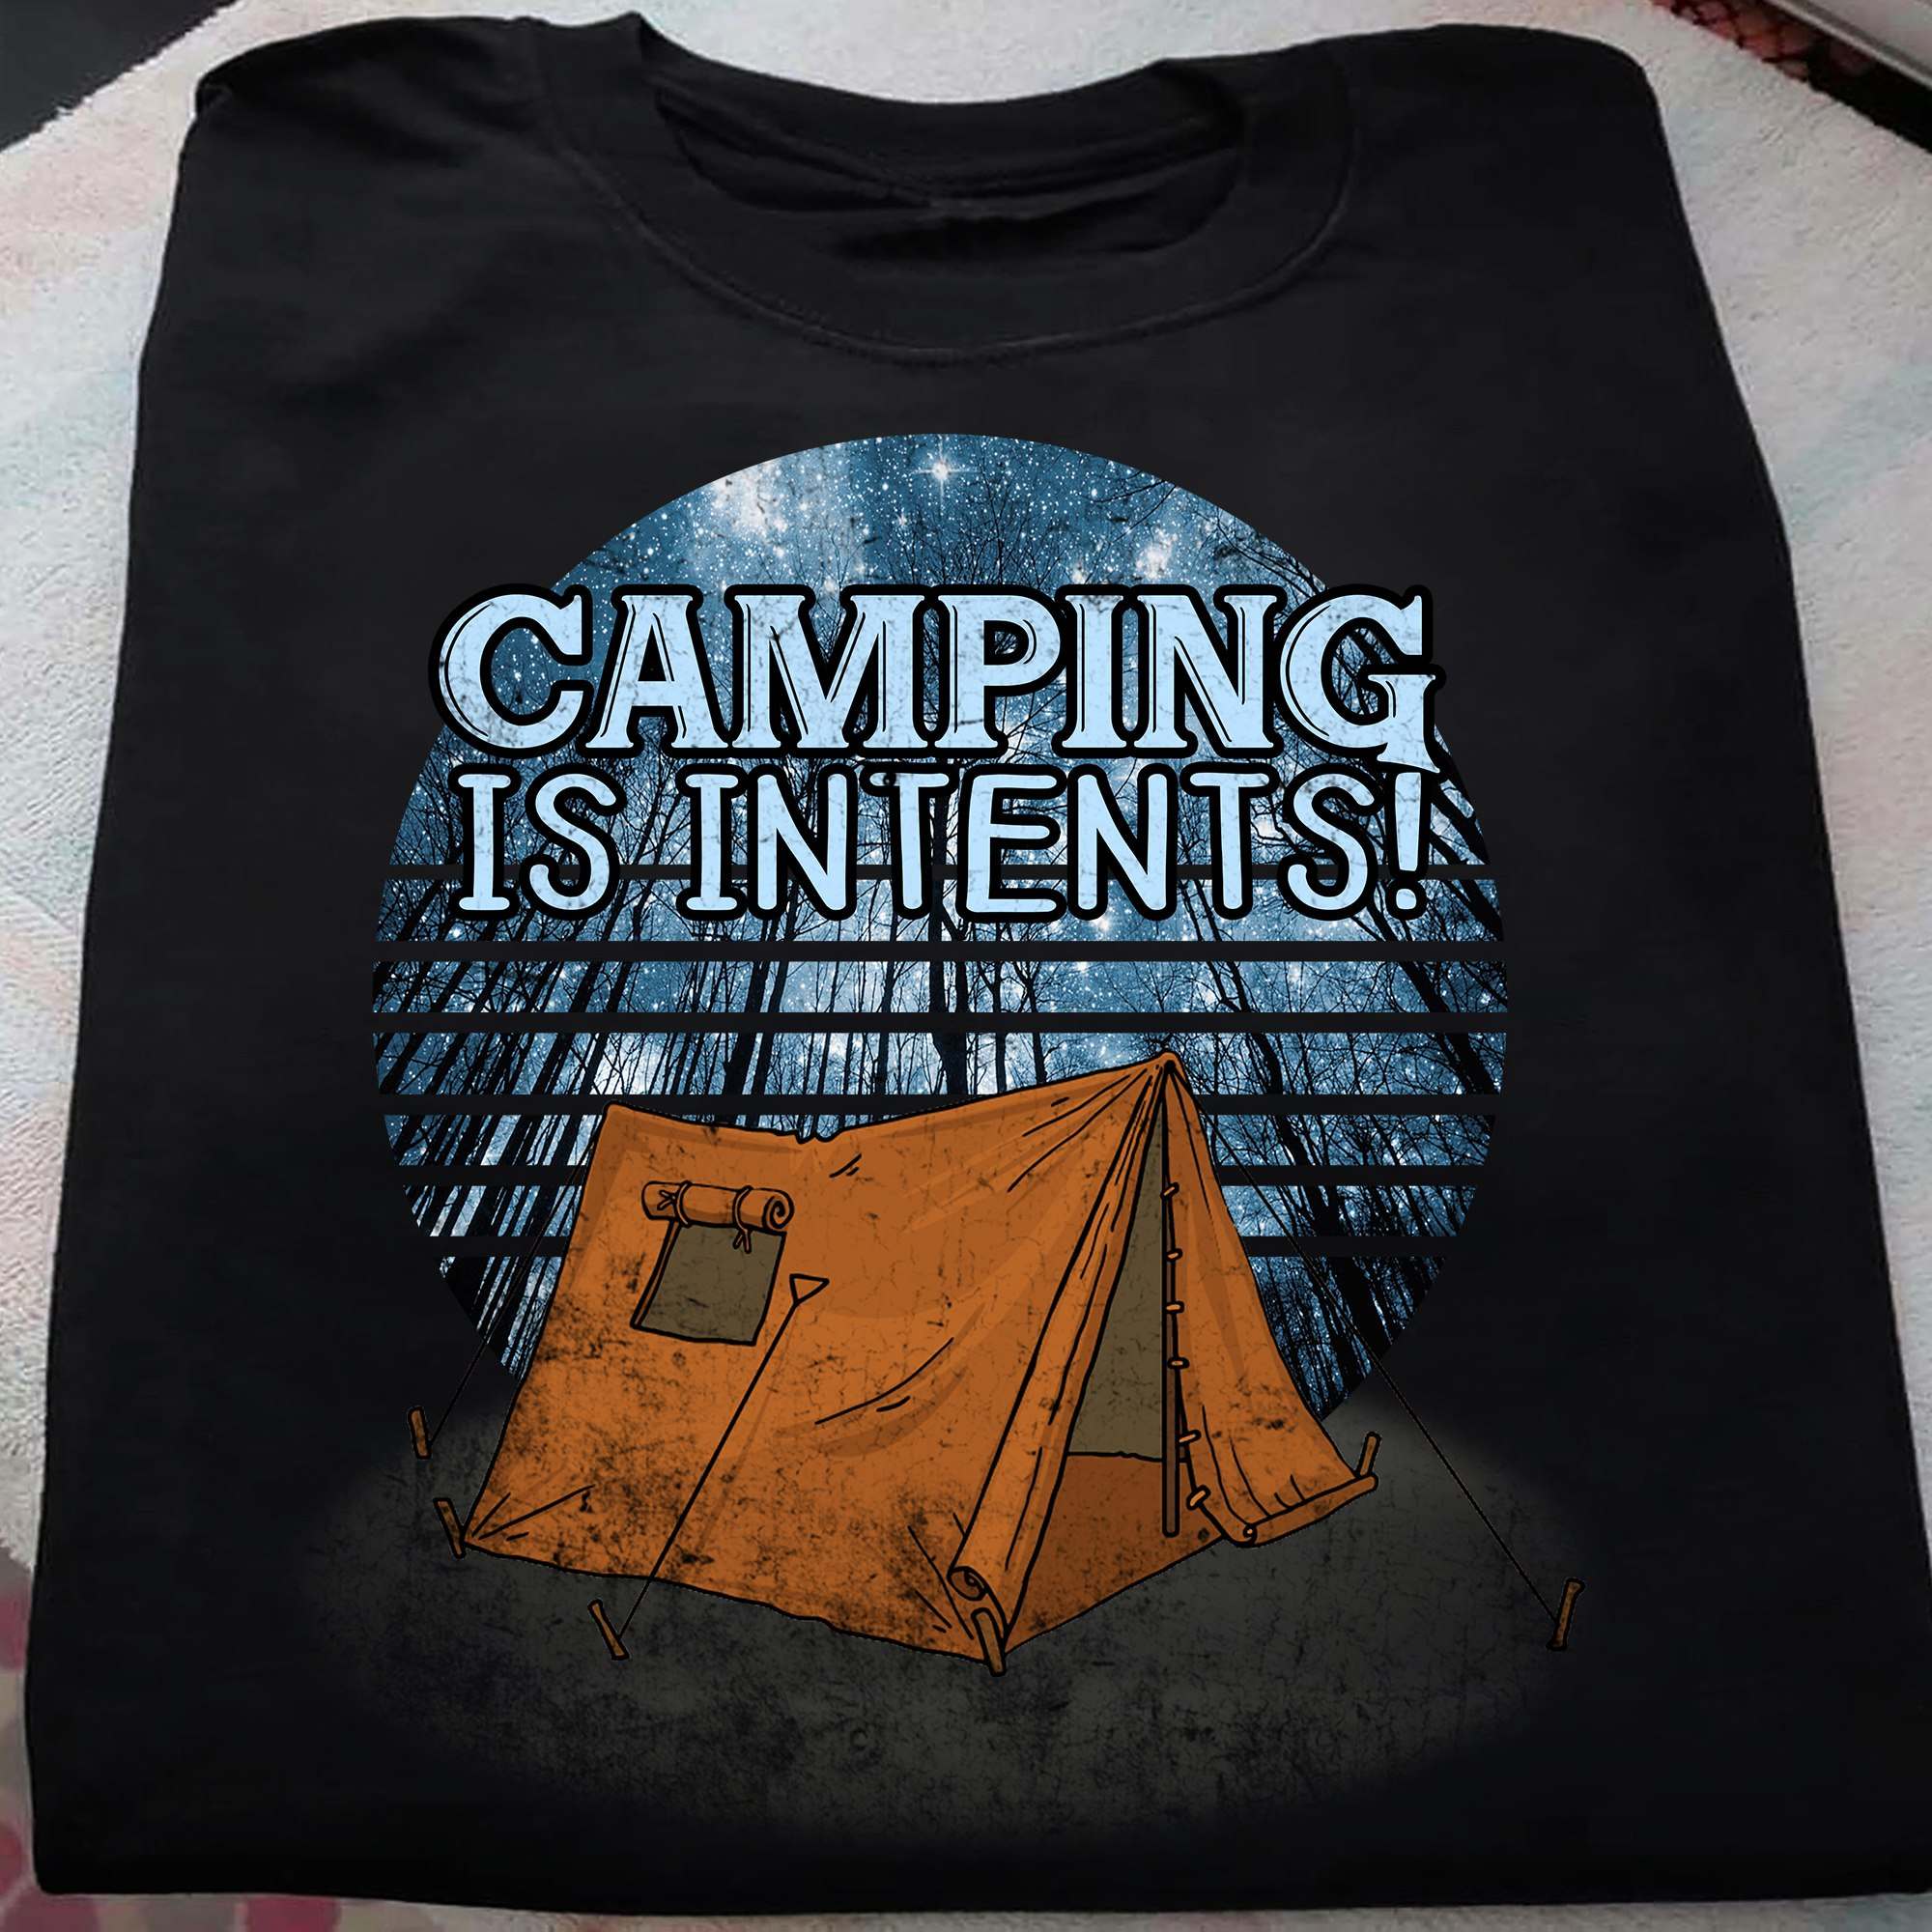 Camping is intents – Love camping, camping under the stars